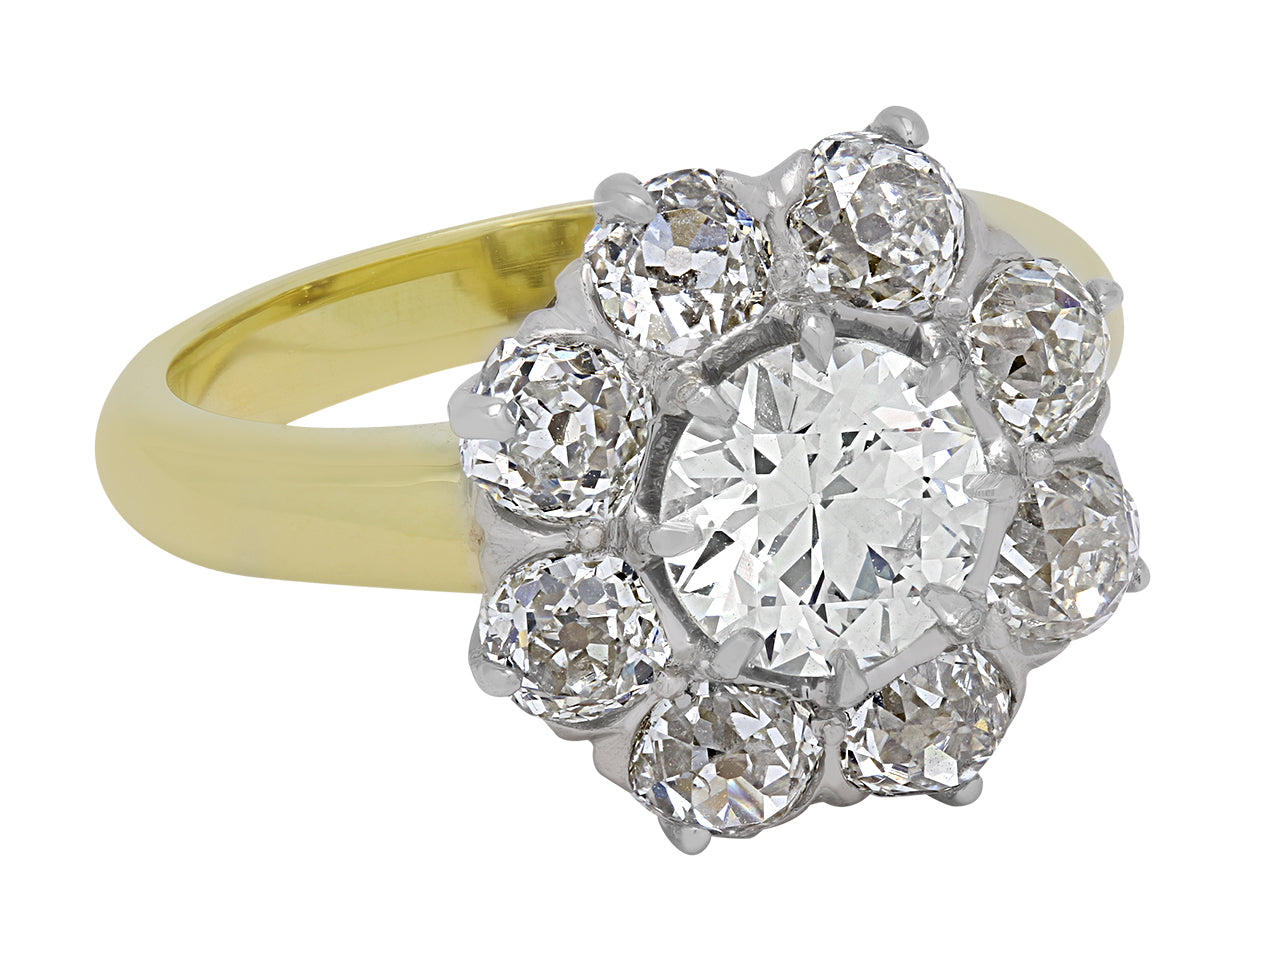 Antique Edwardian Transitional Cut Diamond Cluster Ring in 18K Gold